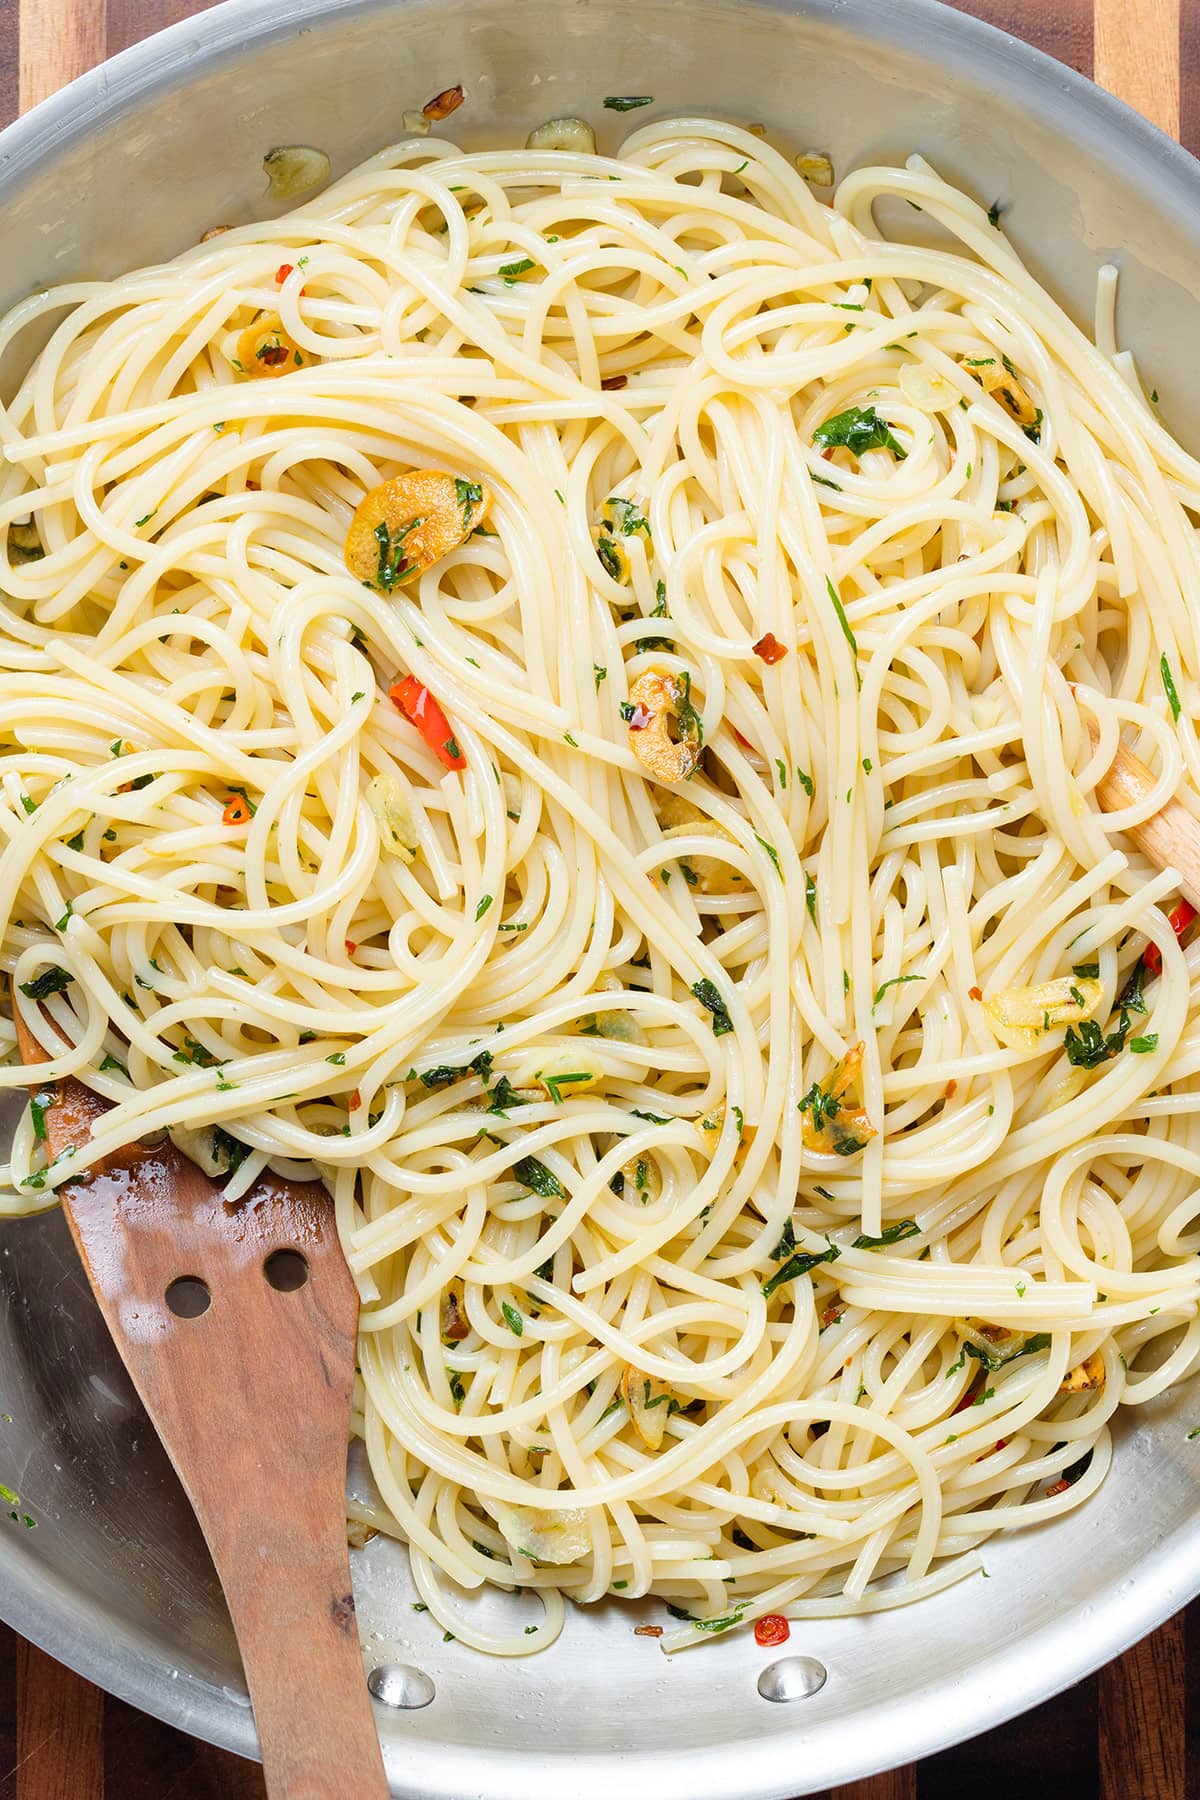 Spaghetti with sauteed garlic, parsley, and chili peppers in a large skillet.